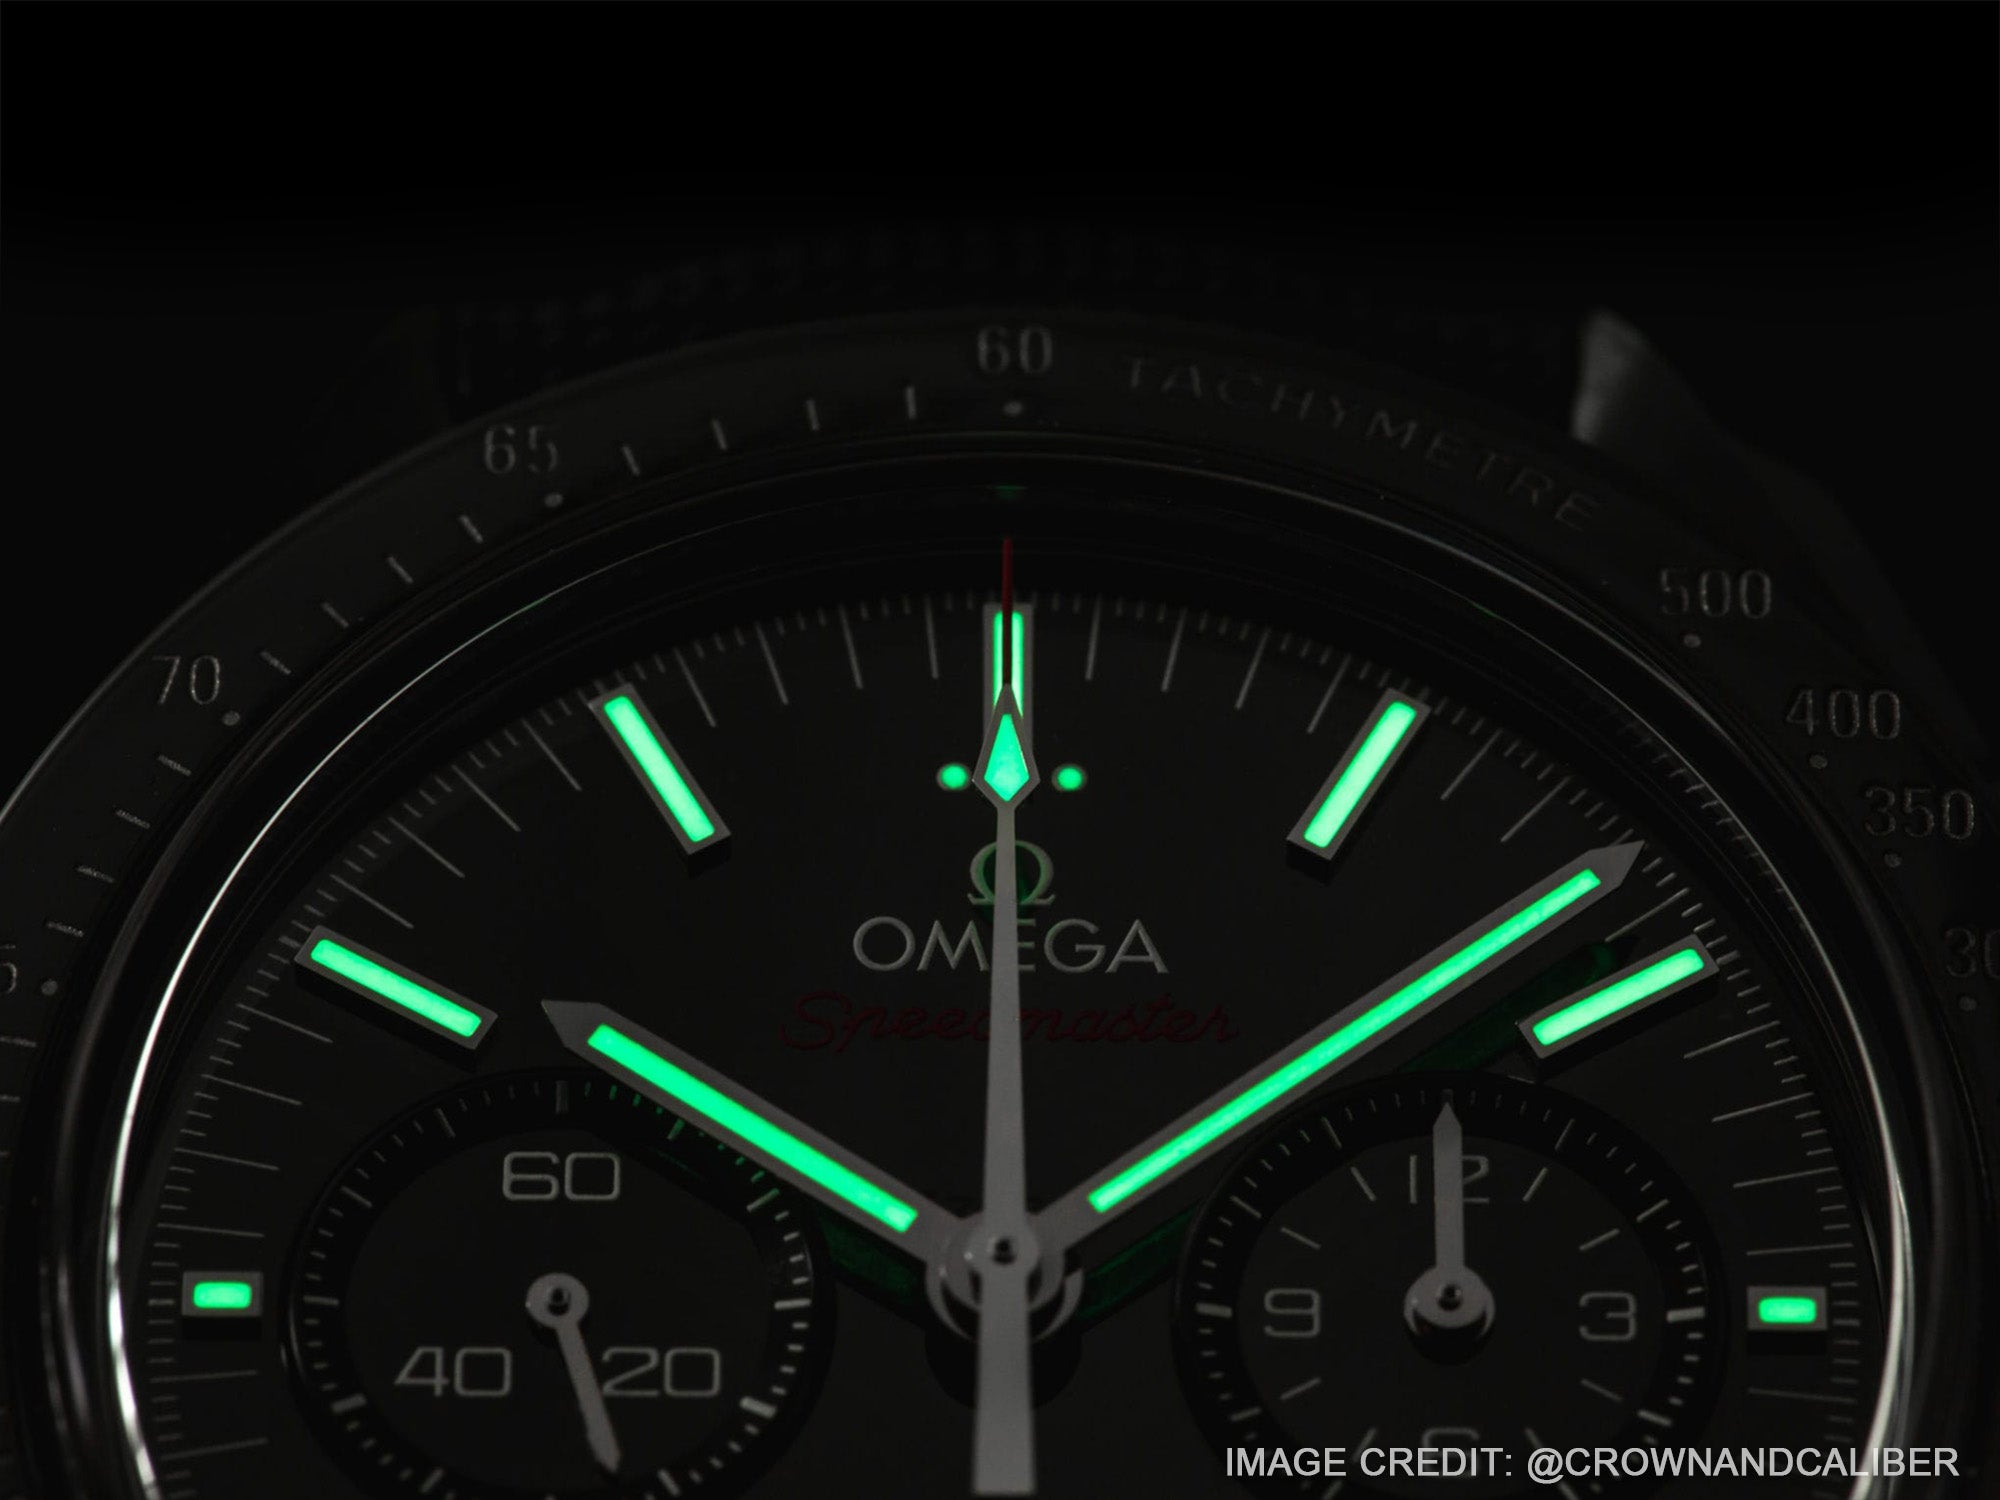 The Super-LumiNova lume on the Omega Speedmaster is highly visible in the dark. 